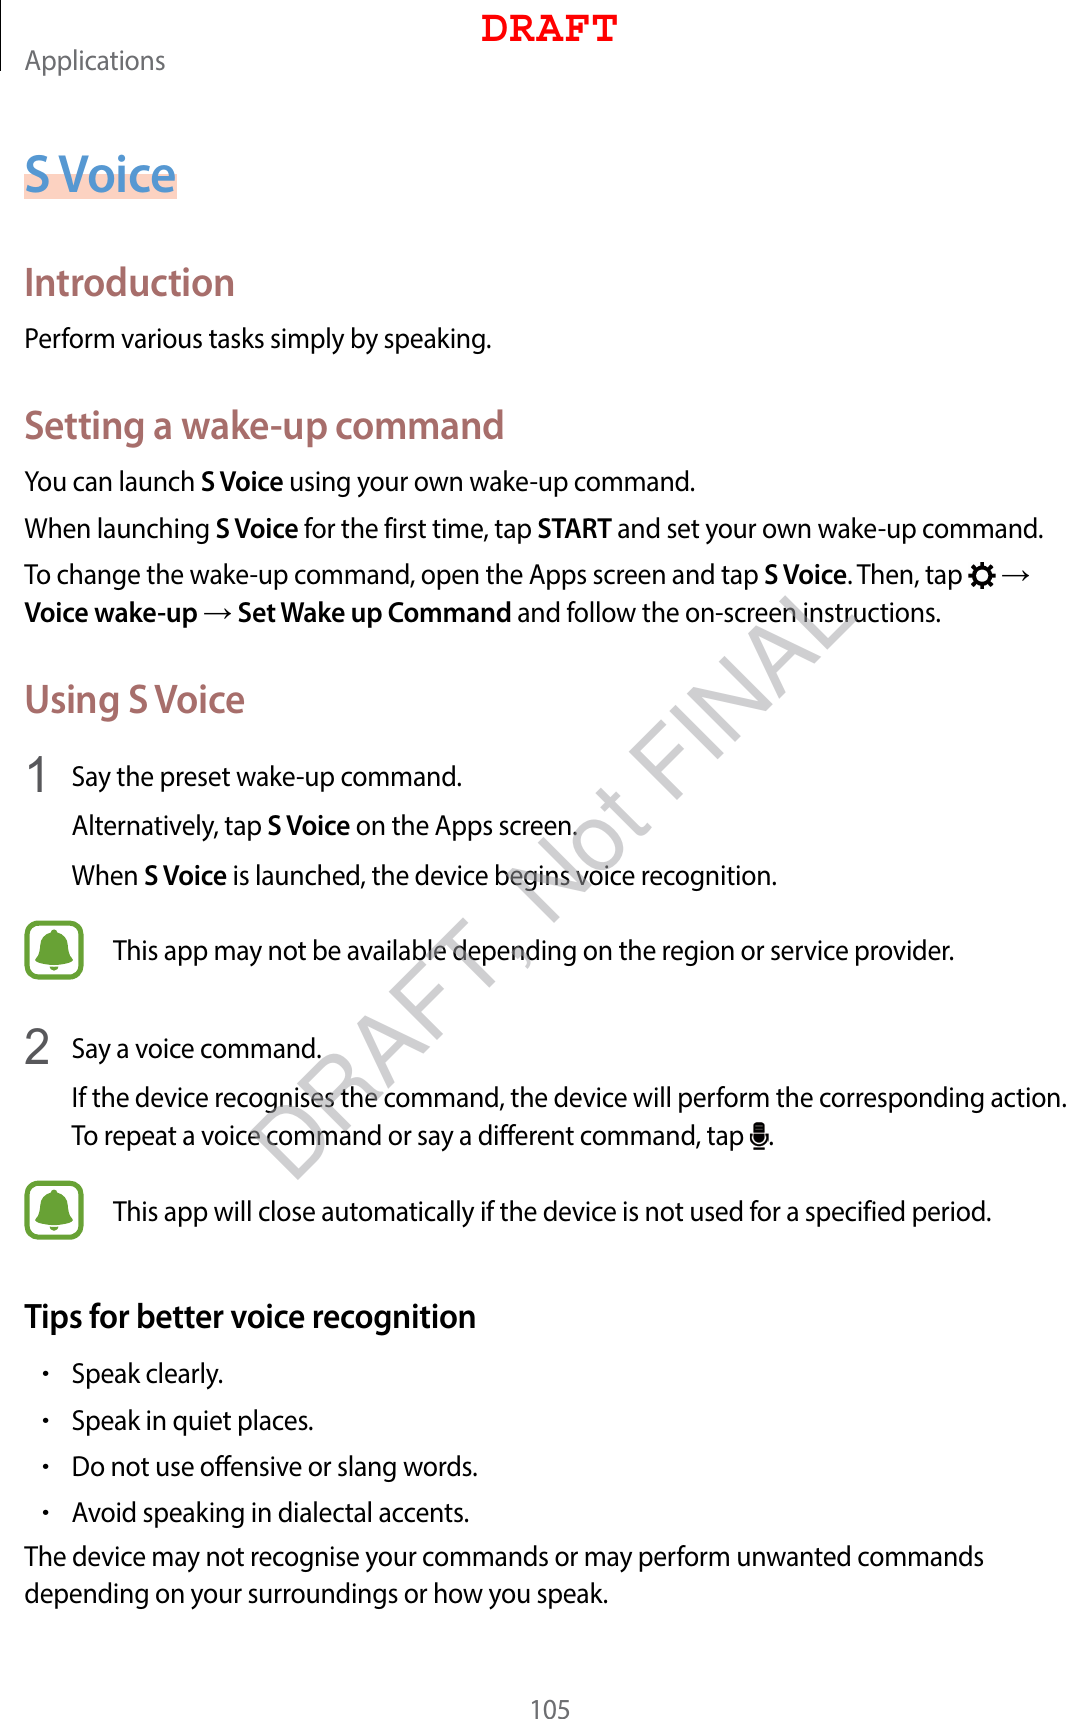 Applications105S VoiceIntroductionPerform various tasks simply by speaking.Setting a wake-up commandYou can launch S Voice using your own wake-up command.When launching S Voice for the first time, tap START and set your own wake-up command.To change the wake-up command, open the Apps screen and tap S Voice. Then, tap    Voice wake-up  Set Wake up Command and follow the on-screen instructions.Using S Voice1  Say the preset wake-up command.Alternatively, tap S Voice on the Apps screen.When S Voice is launched, the device begins voice recognition.This app may not be available depending on the region or service provider.2  Say a voice command.If the device recognises the command, the device will perform the corresponding action. To repeat a voice command or say a different command, tap  .This app will close automatically if the device is not used for a specified period.Tips for better voice recognition•Speak clearly.•Speak in quiet places.•Do not use offensive or slang words.•Avoid speaking in dialectal accents.The device may not recognise your commands or may perform unwanted commands depending on your surroundings or how you speak.DRAFTDRAFT, Not FINAL